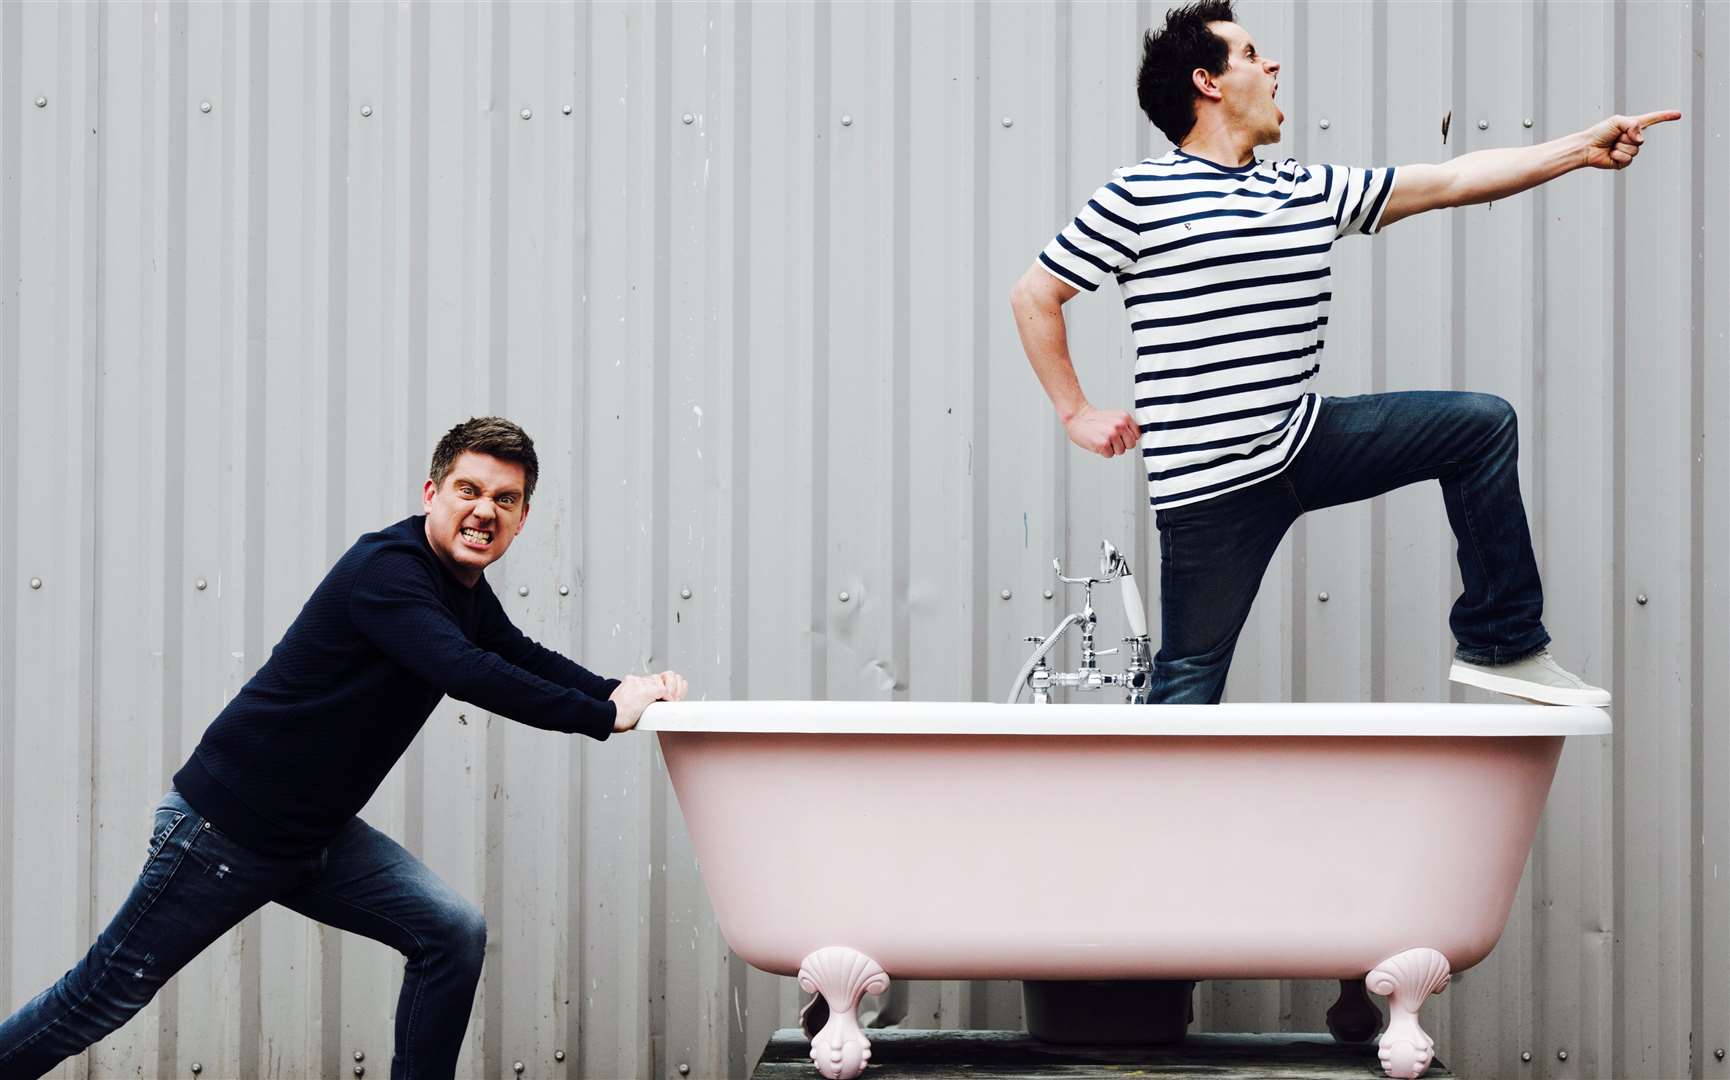 Dick and Dom will be at Dreamland this Easter